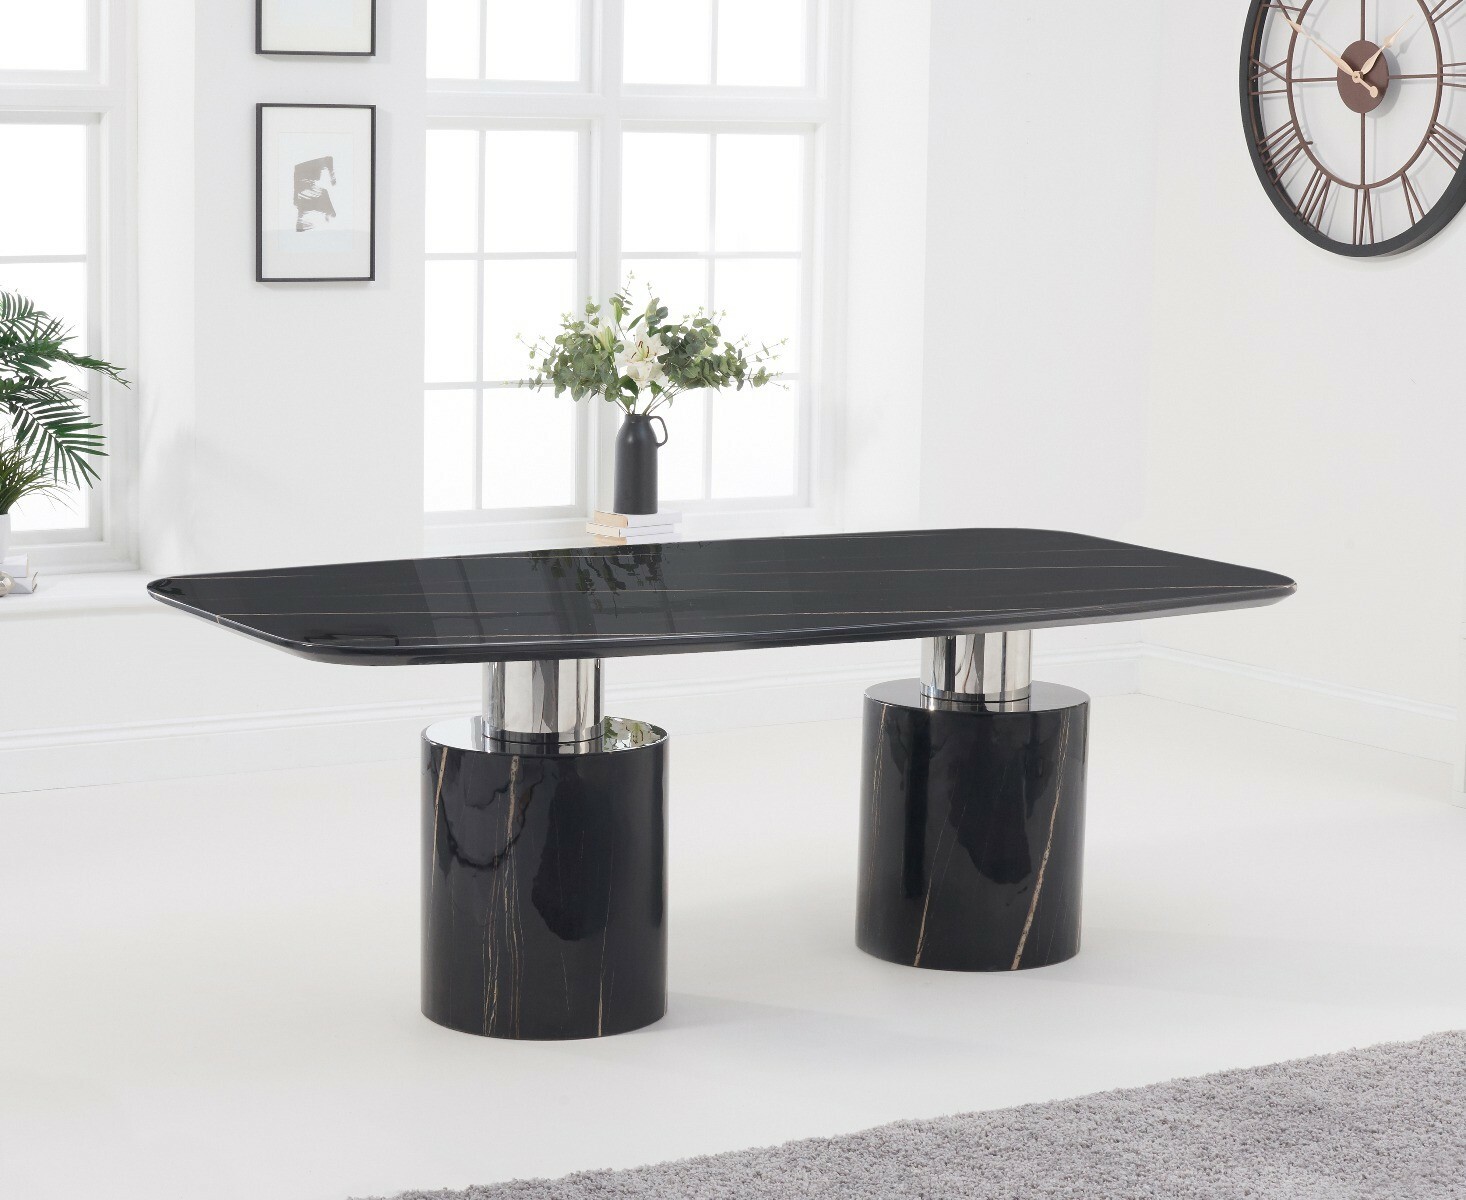 Photo 2 of Antonio 180cm black marble dining table with 8 cream francesca chairs